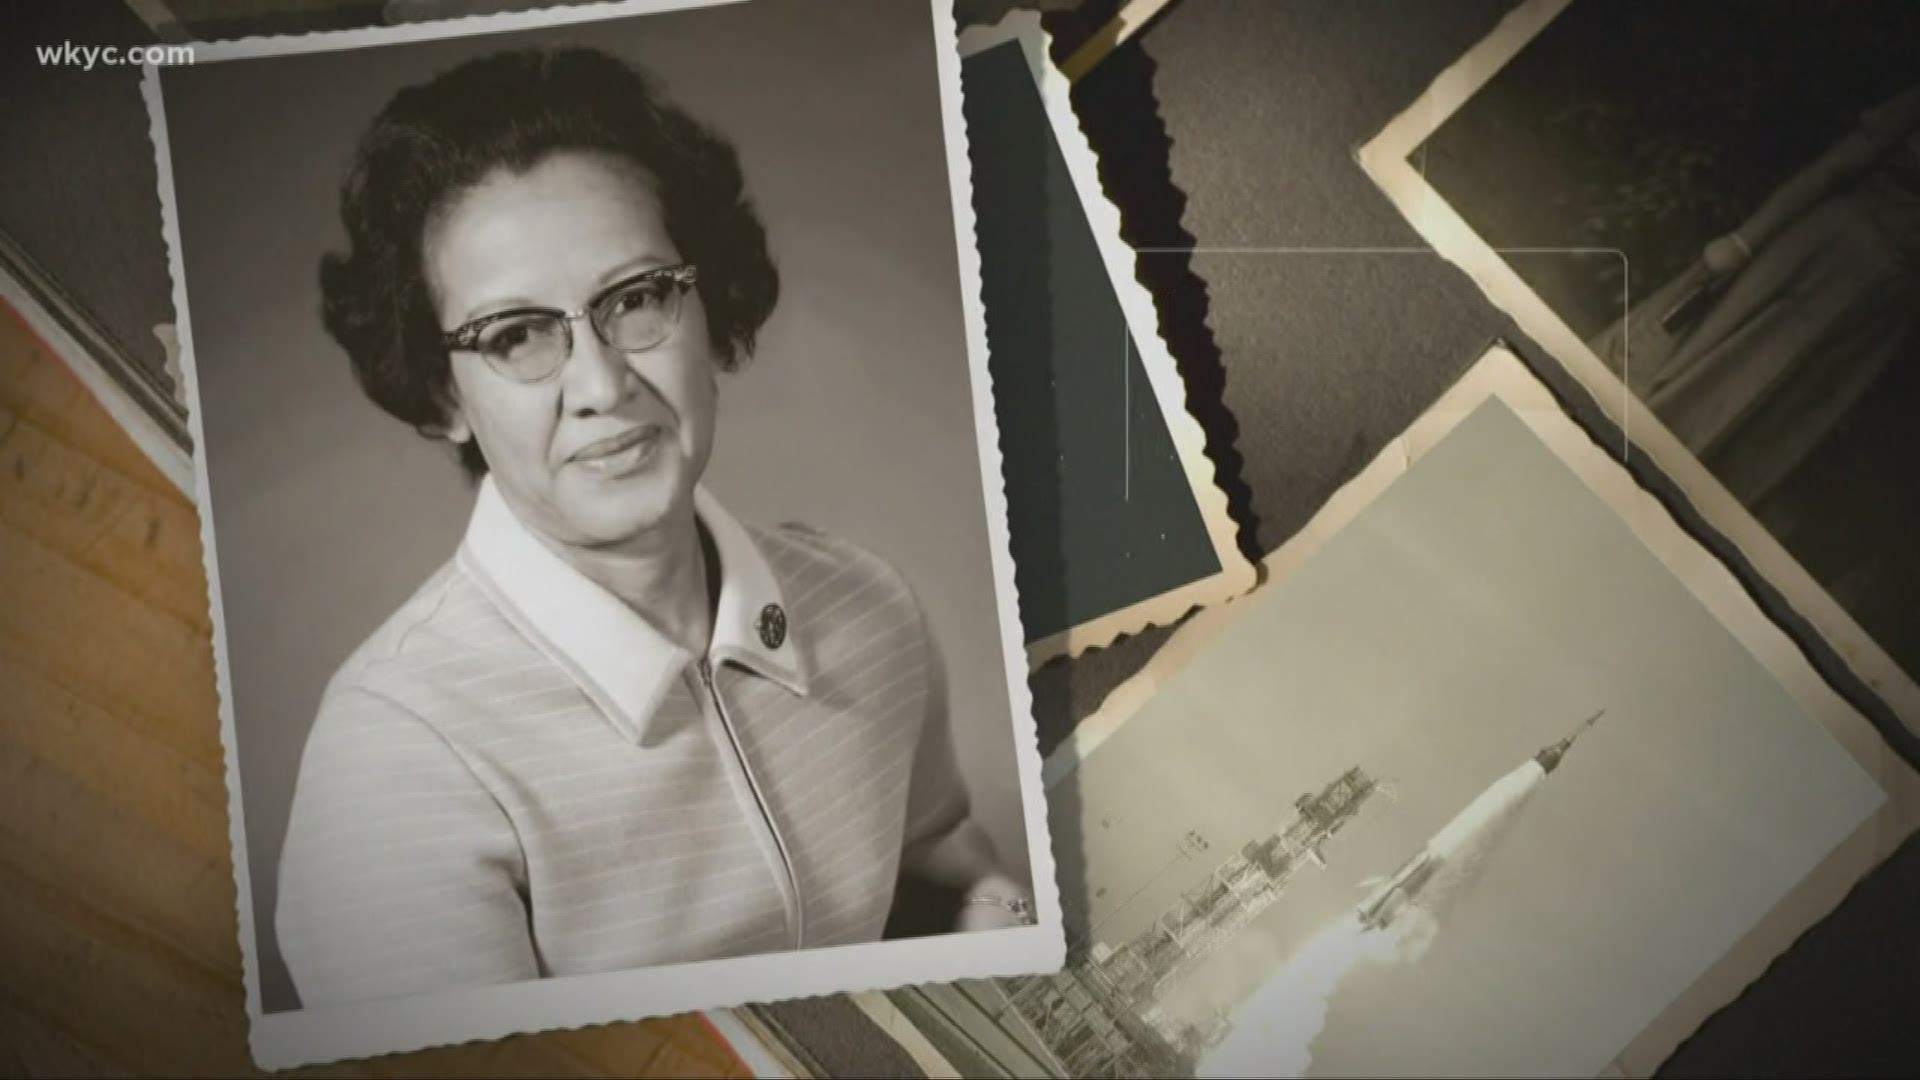 The little-known story of how she calculated America’s first space mission and moon landing was recently memorialized in the film “Hidden Figures.”